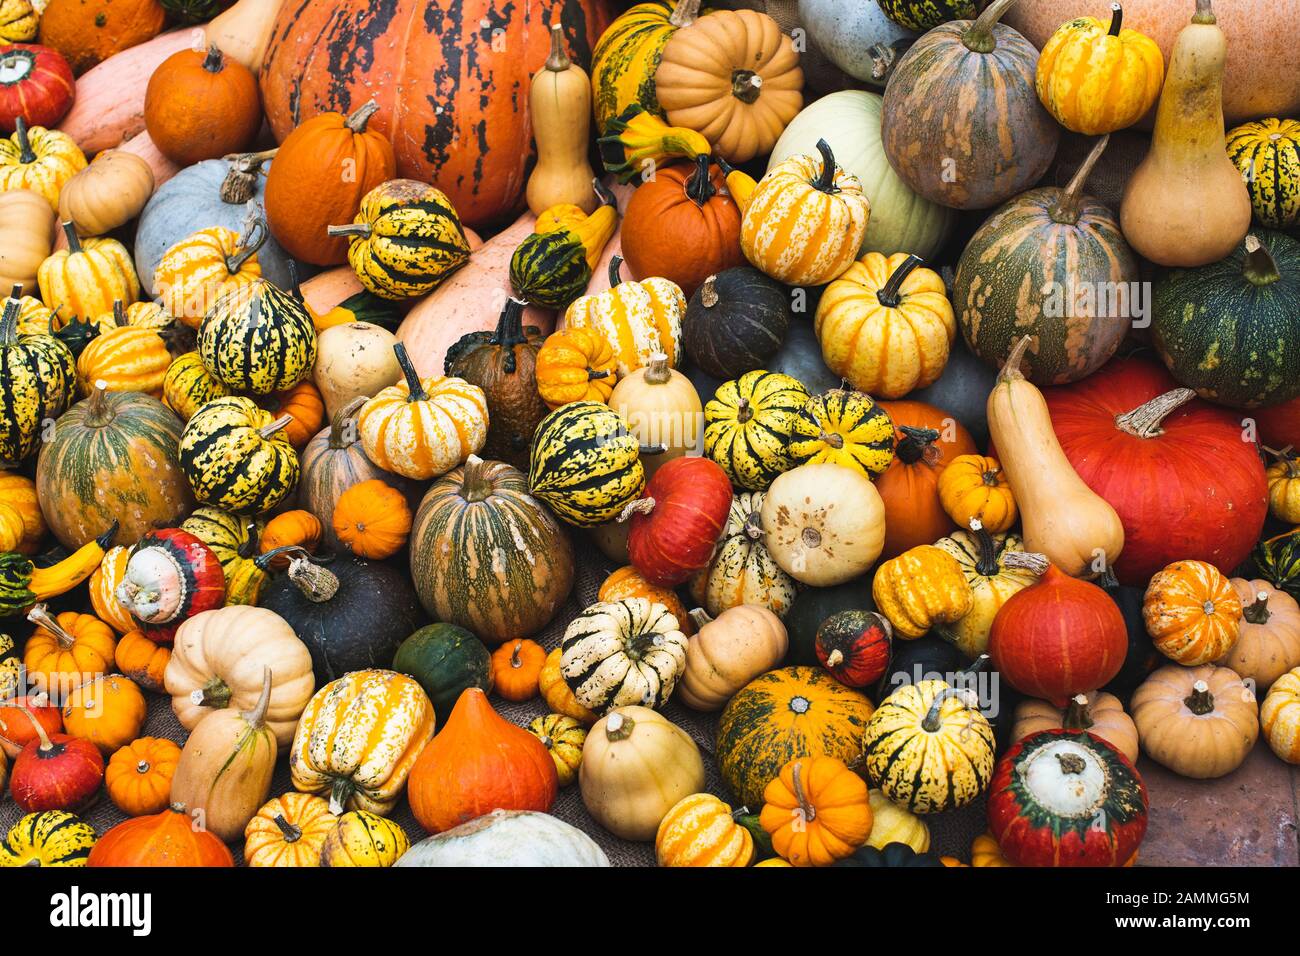 Large pile of pumpkins, squashes and gourds. Stock Photo